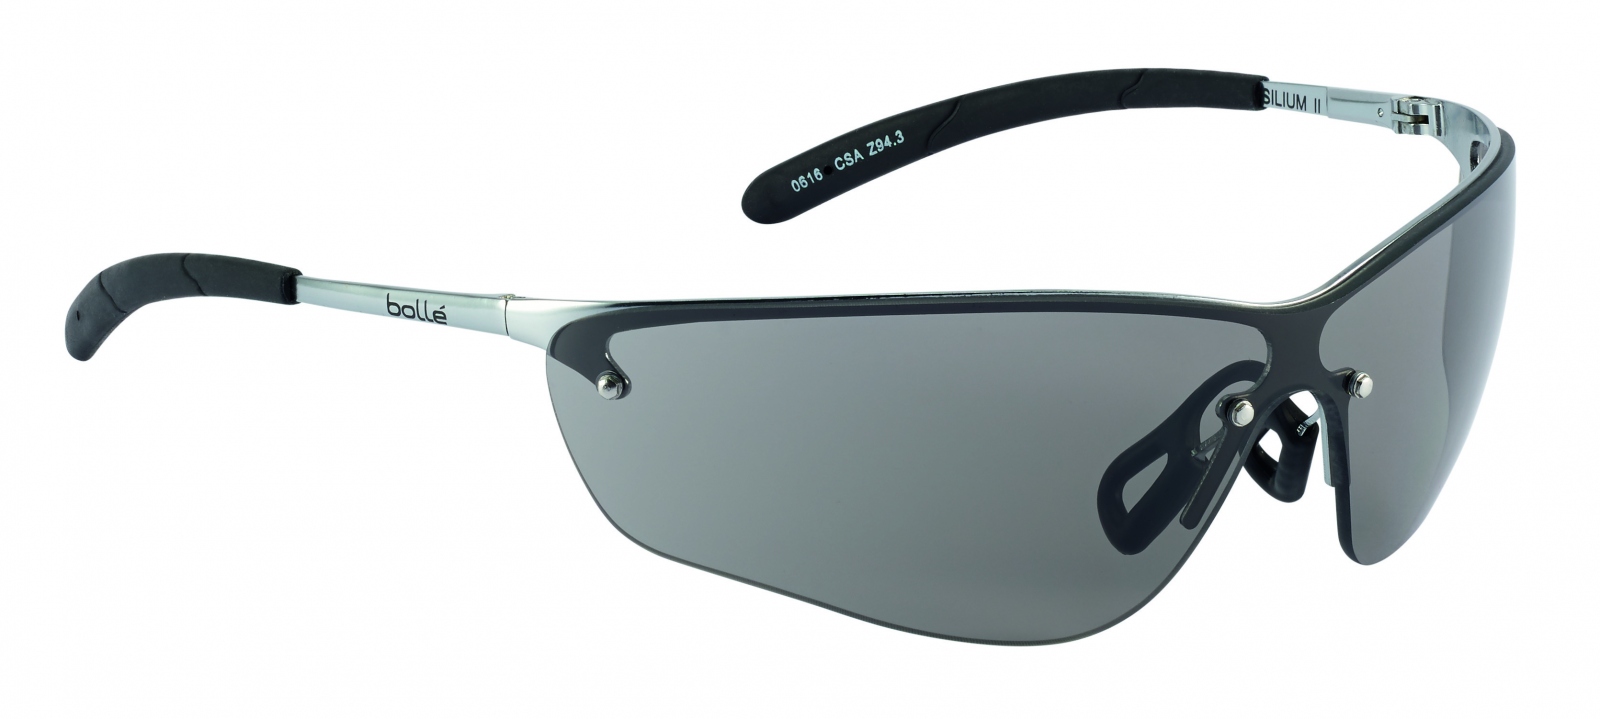 pics/Bollé/SILIUM SILPSF/bolle-silium-silpsf-safety-glasses-pc-smoke-as-af-en166-front.jpg